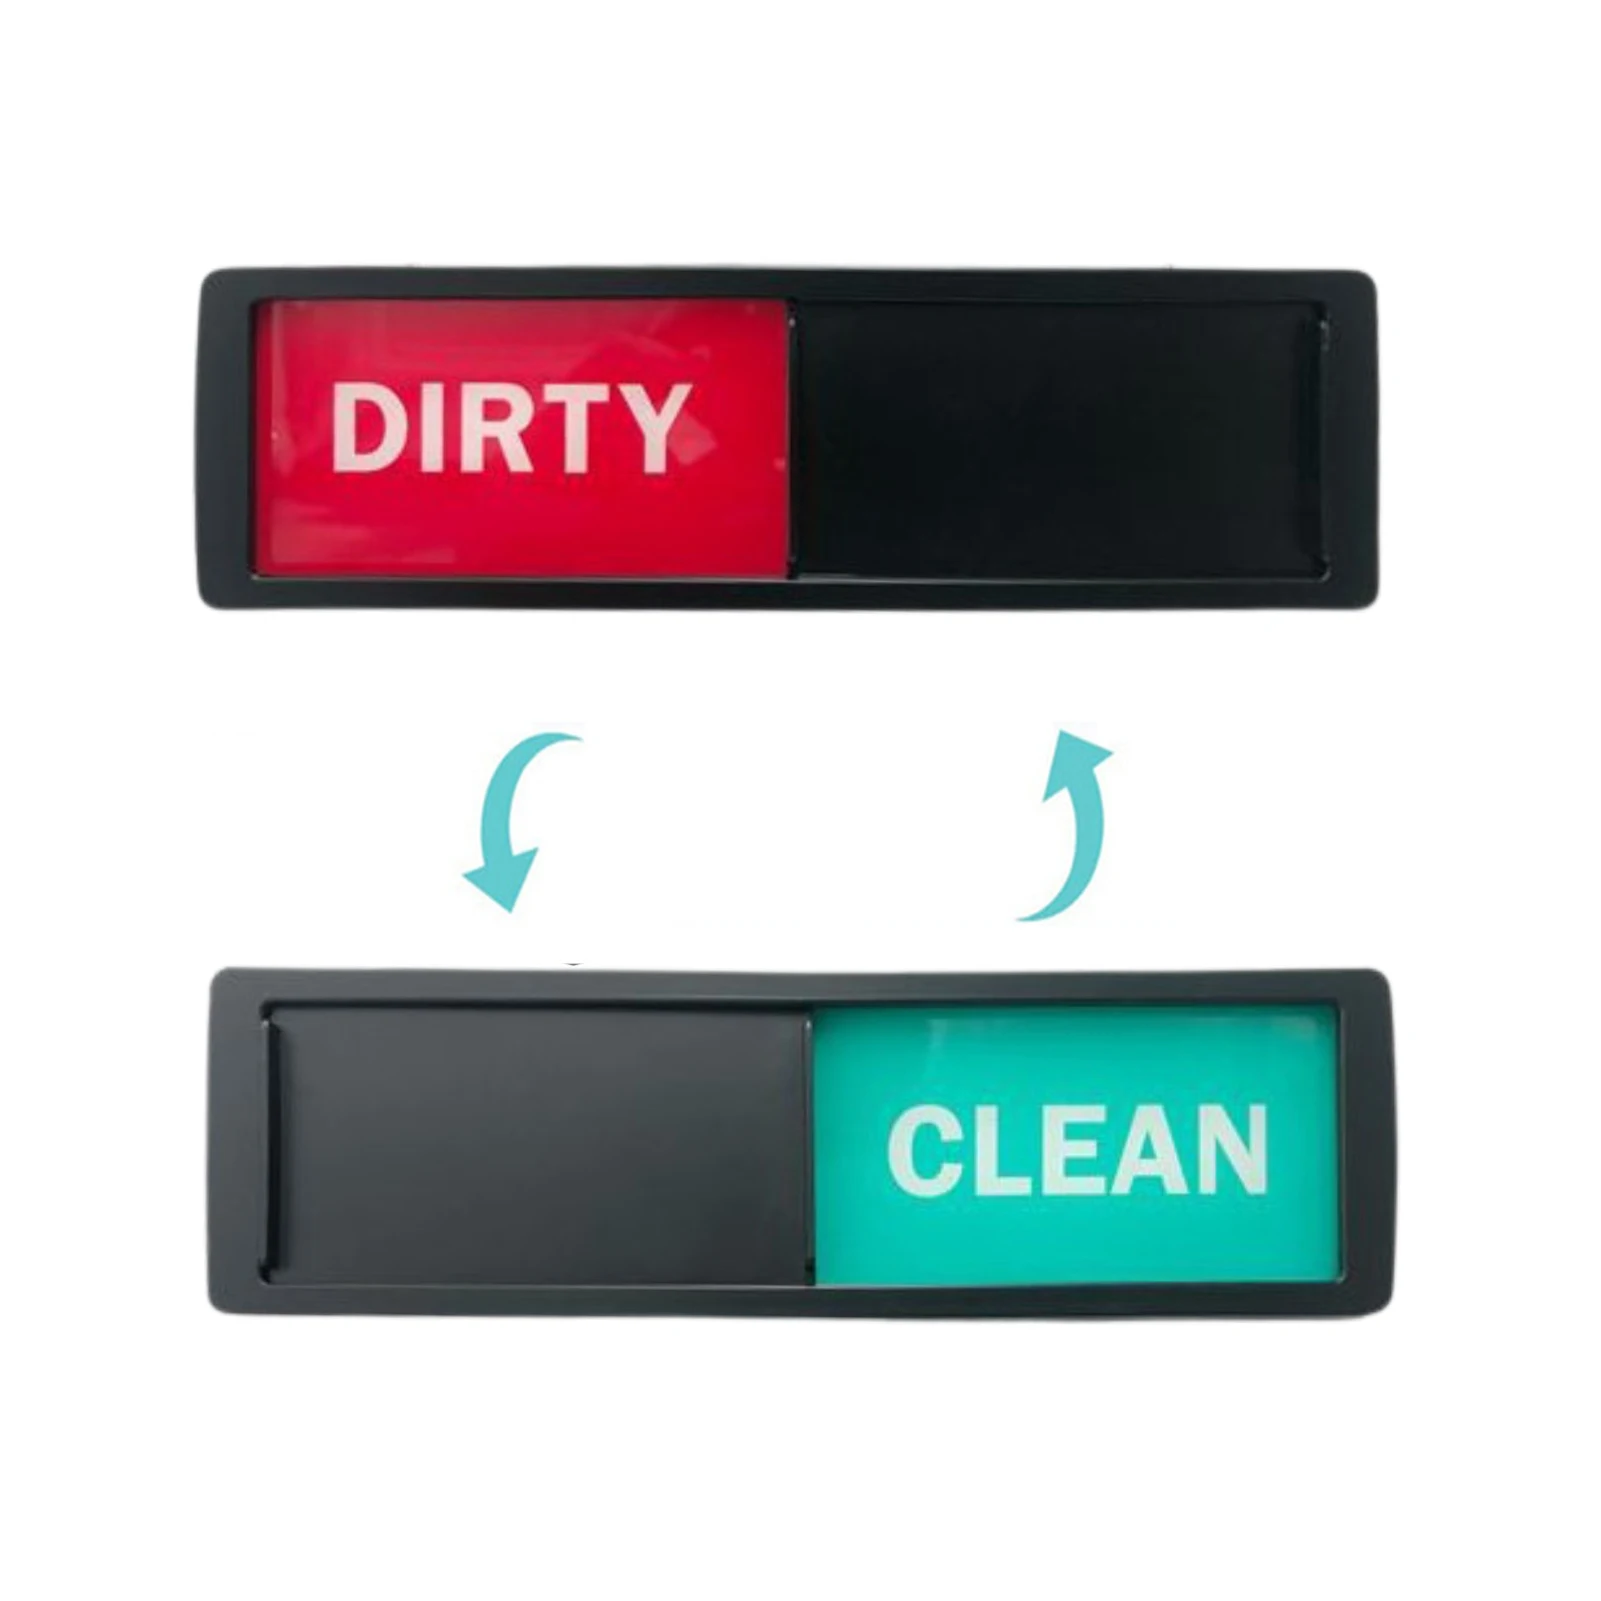 Dishwasher Magnet Clean Dirty Magnet for Dishwasher Refrigerator Dirty Clean Sign Indicator for Kitchen Organization and Storage